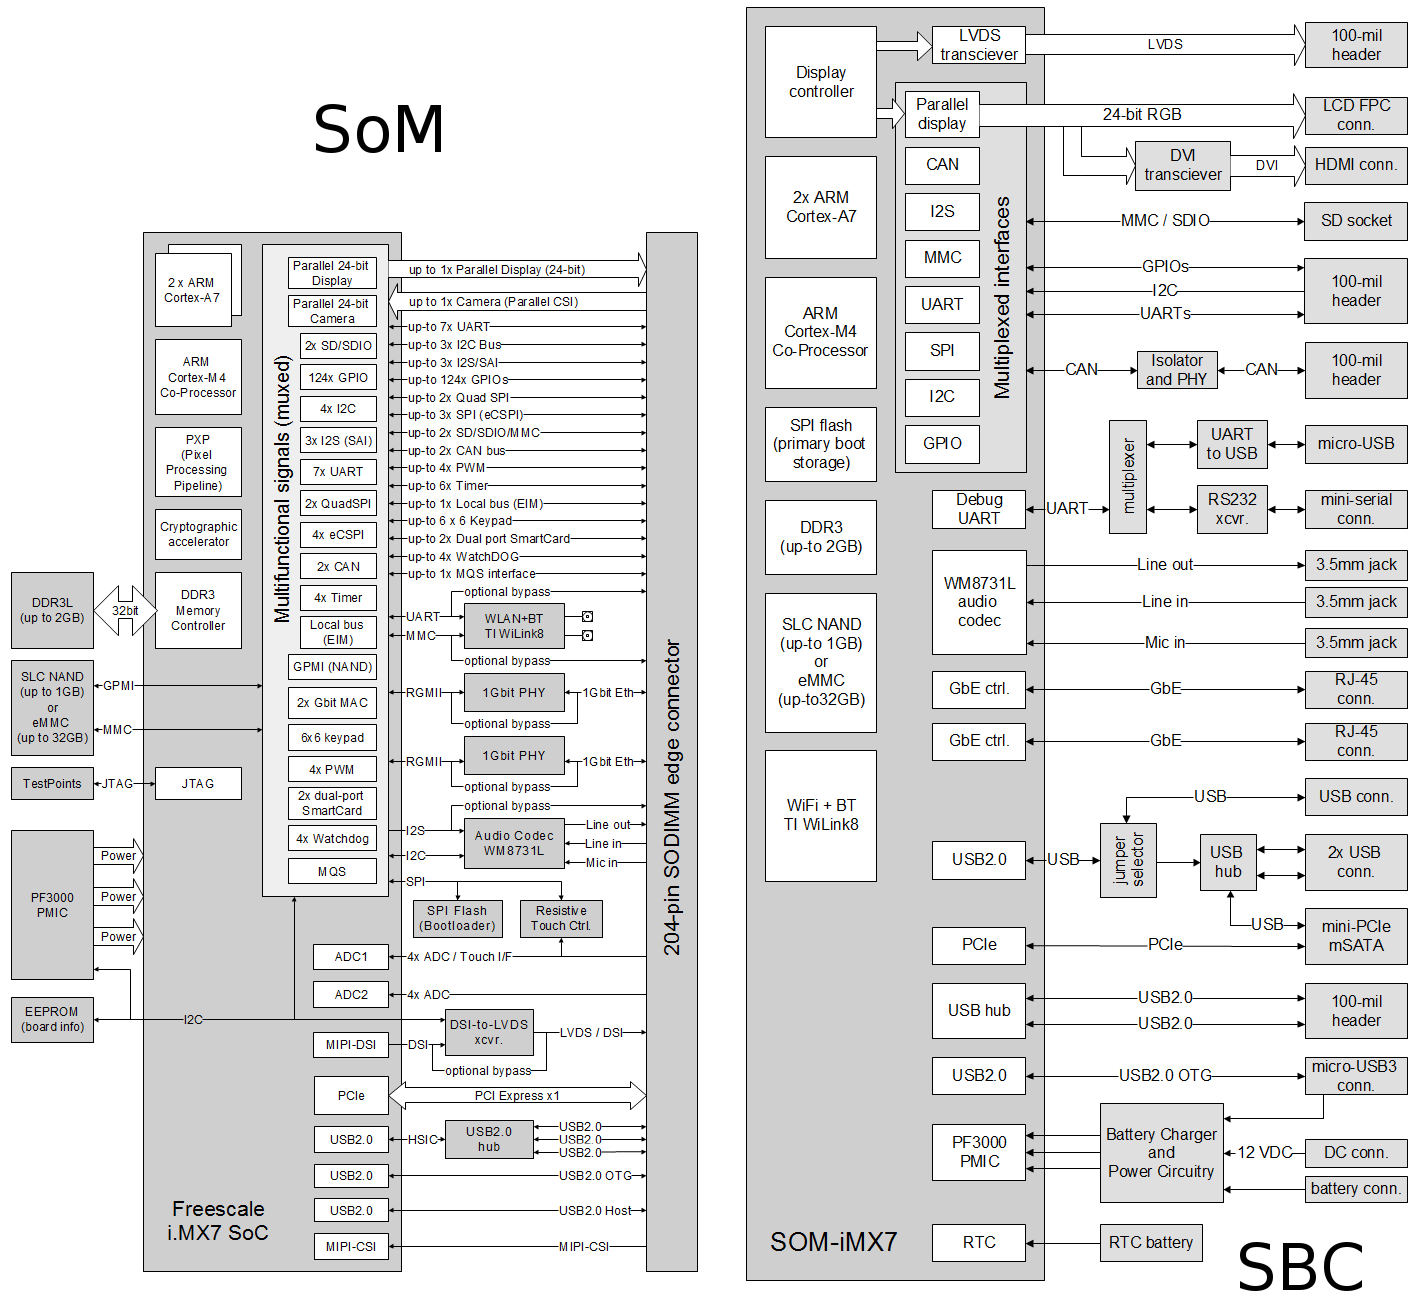 SoM (left) and SBC (right) Block Diagrams - Click to Enlarge